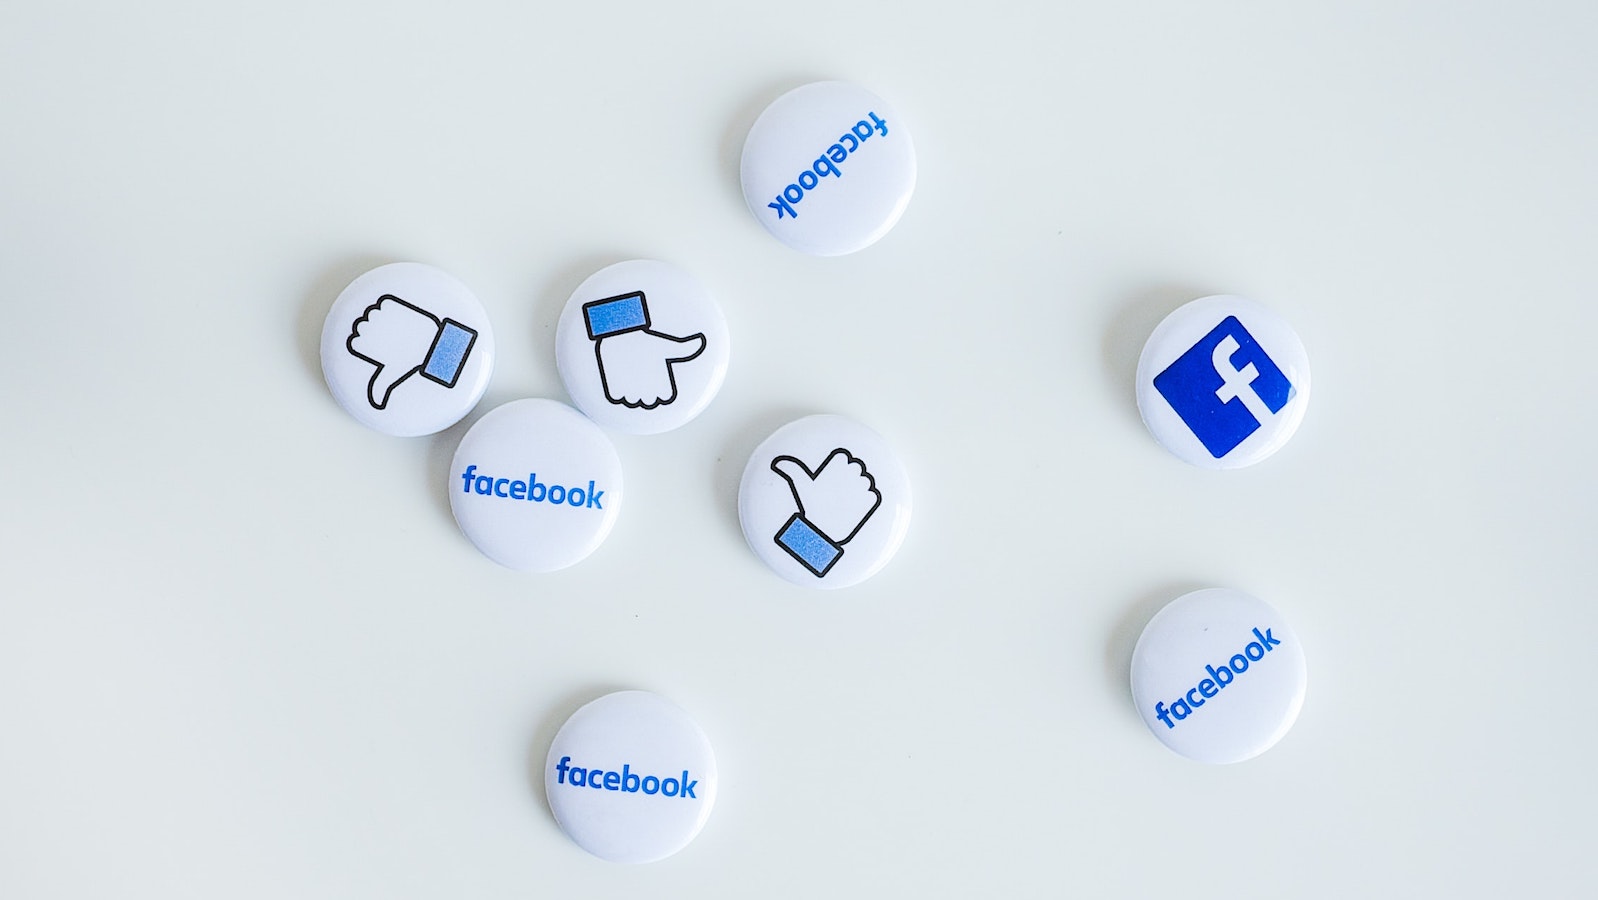 Facebook Ads – More than just “Likes”